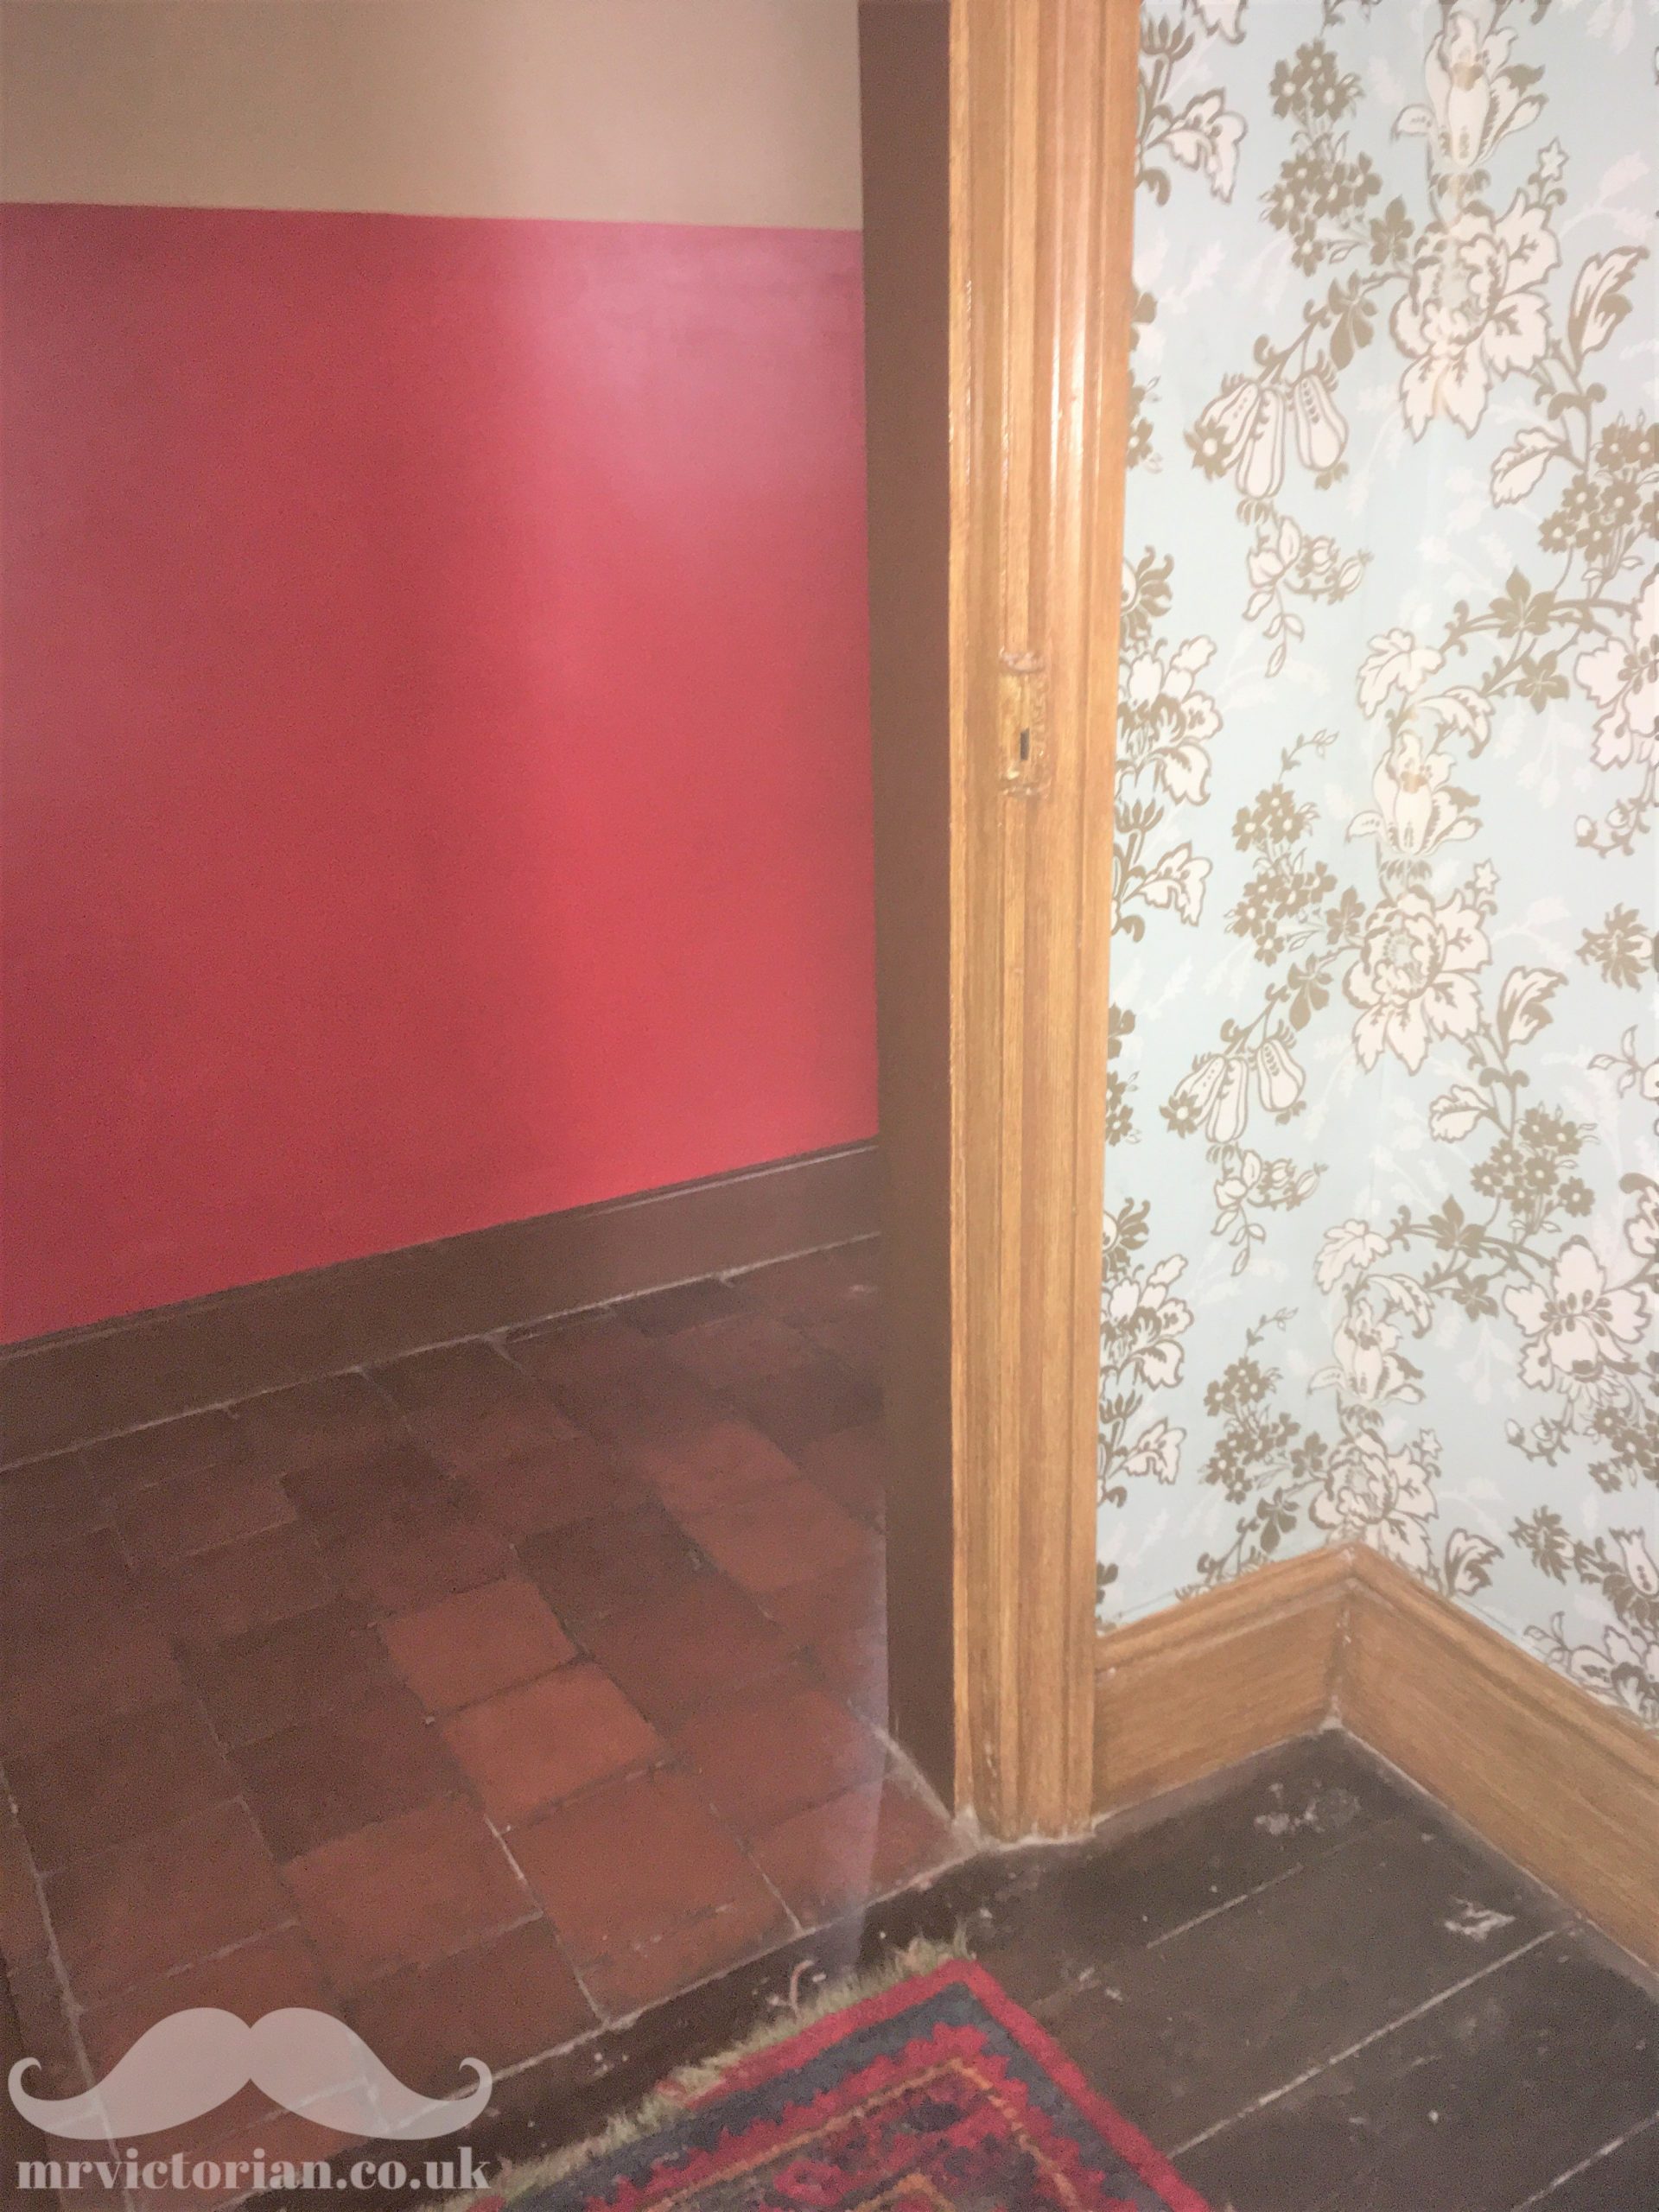 Photograph showing a doorway with a parlour with woodgrained woodwork and floral wallpaper against a plainer inner hallway with painted walls and brown woodwork.